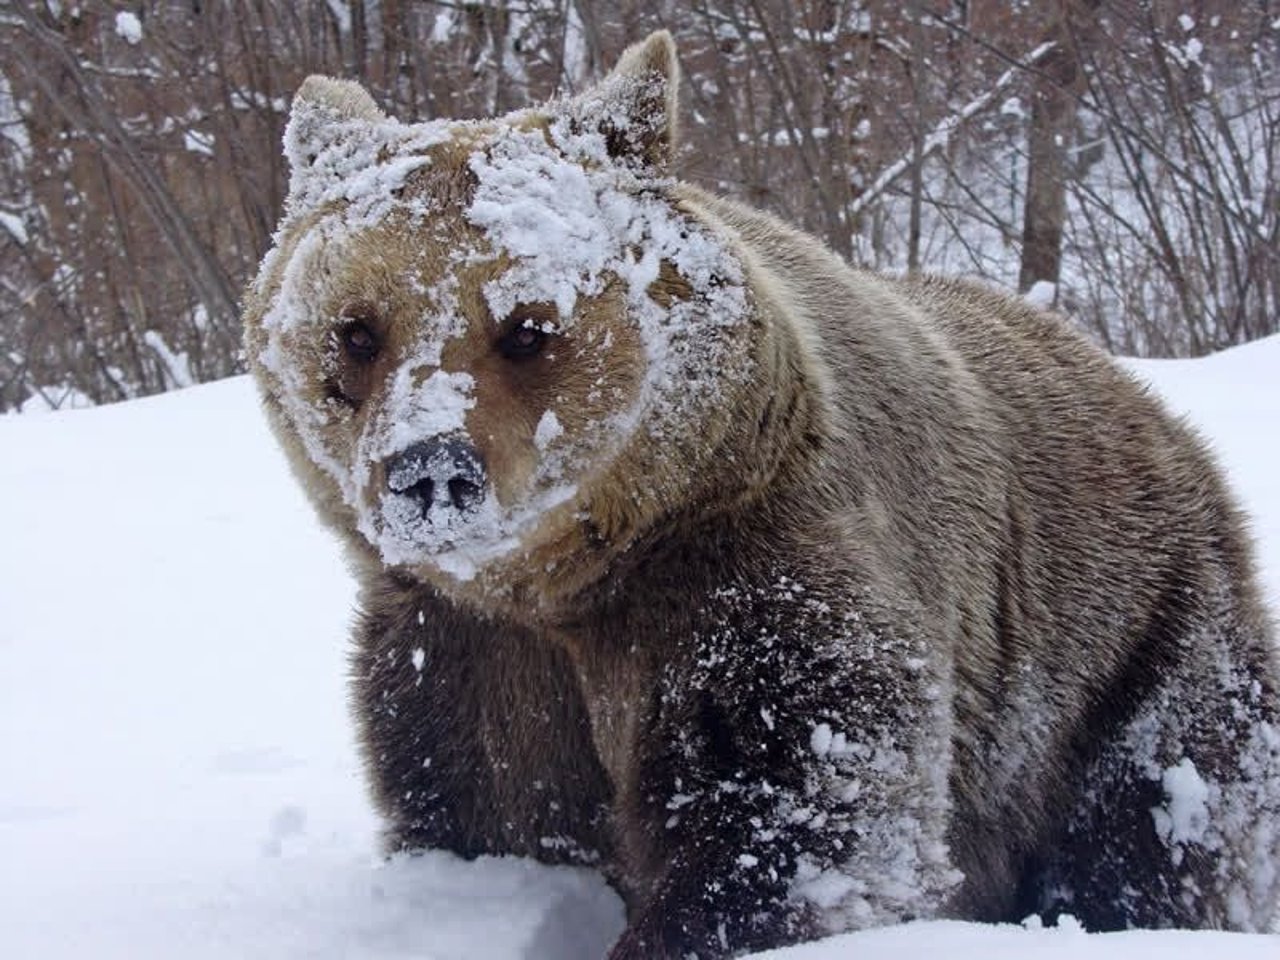 Odi the bear playing in the snow at the sanctuary in Romania